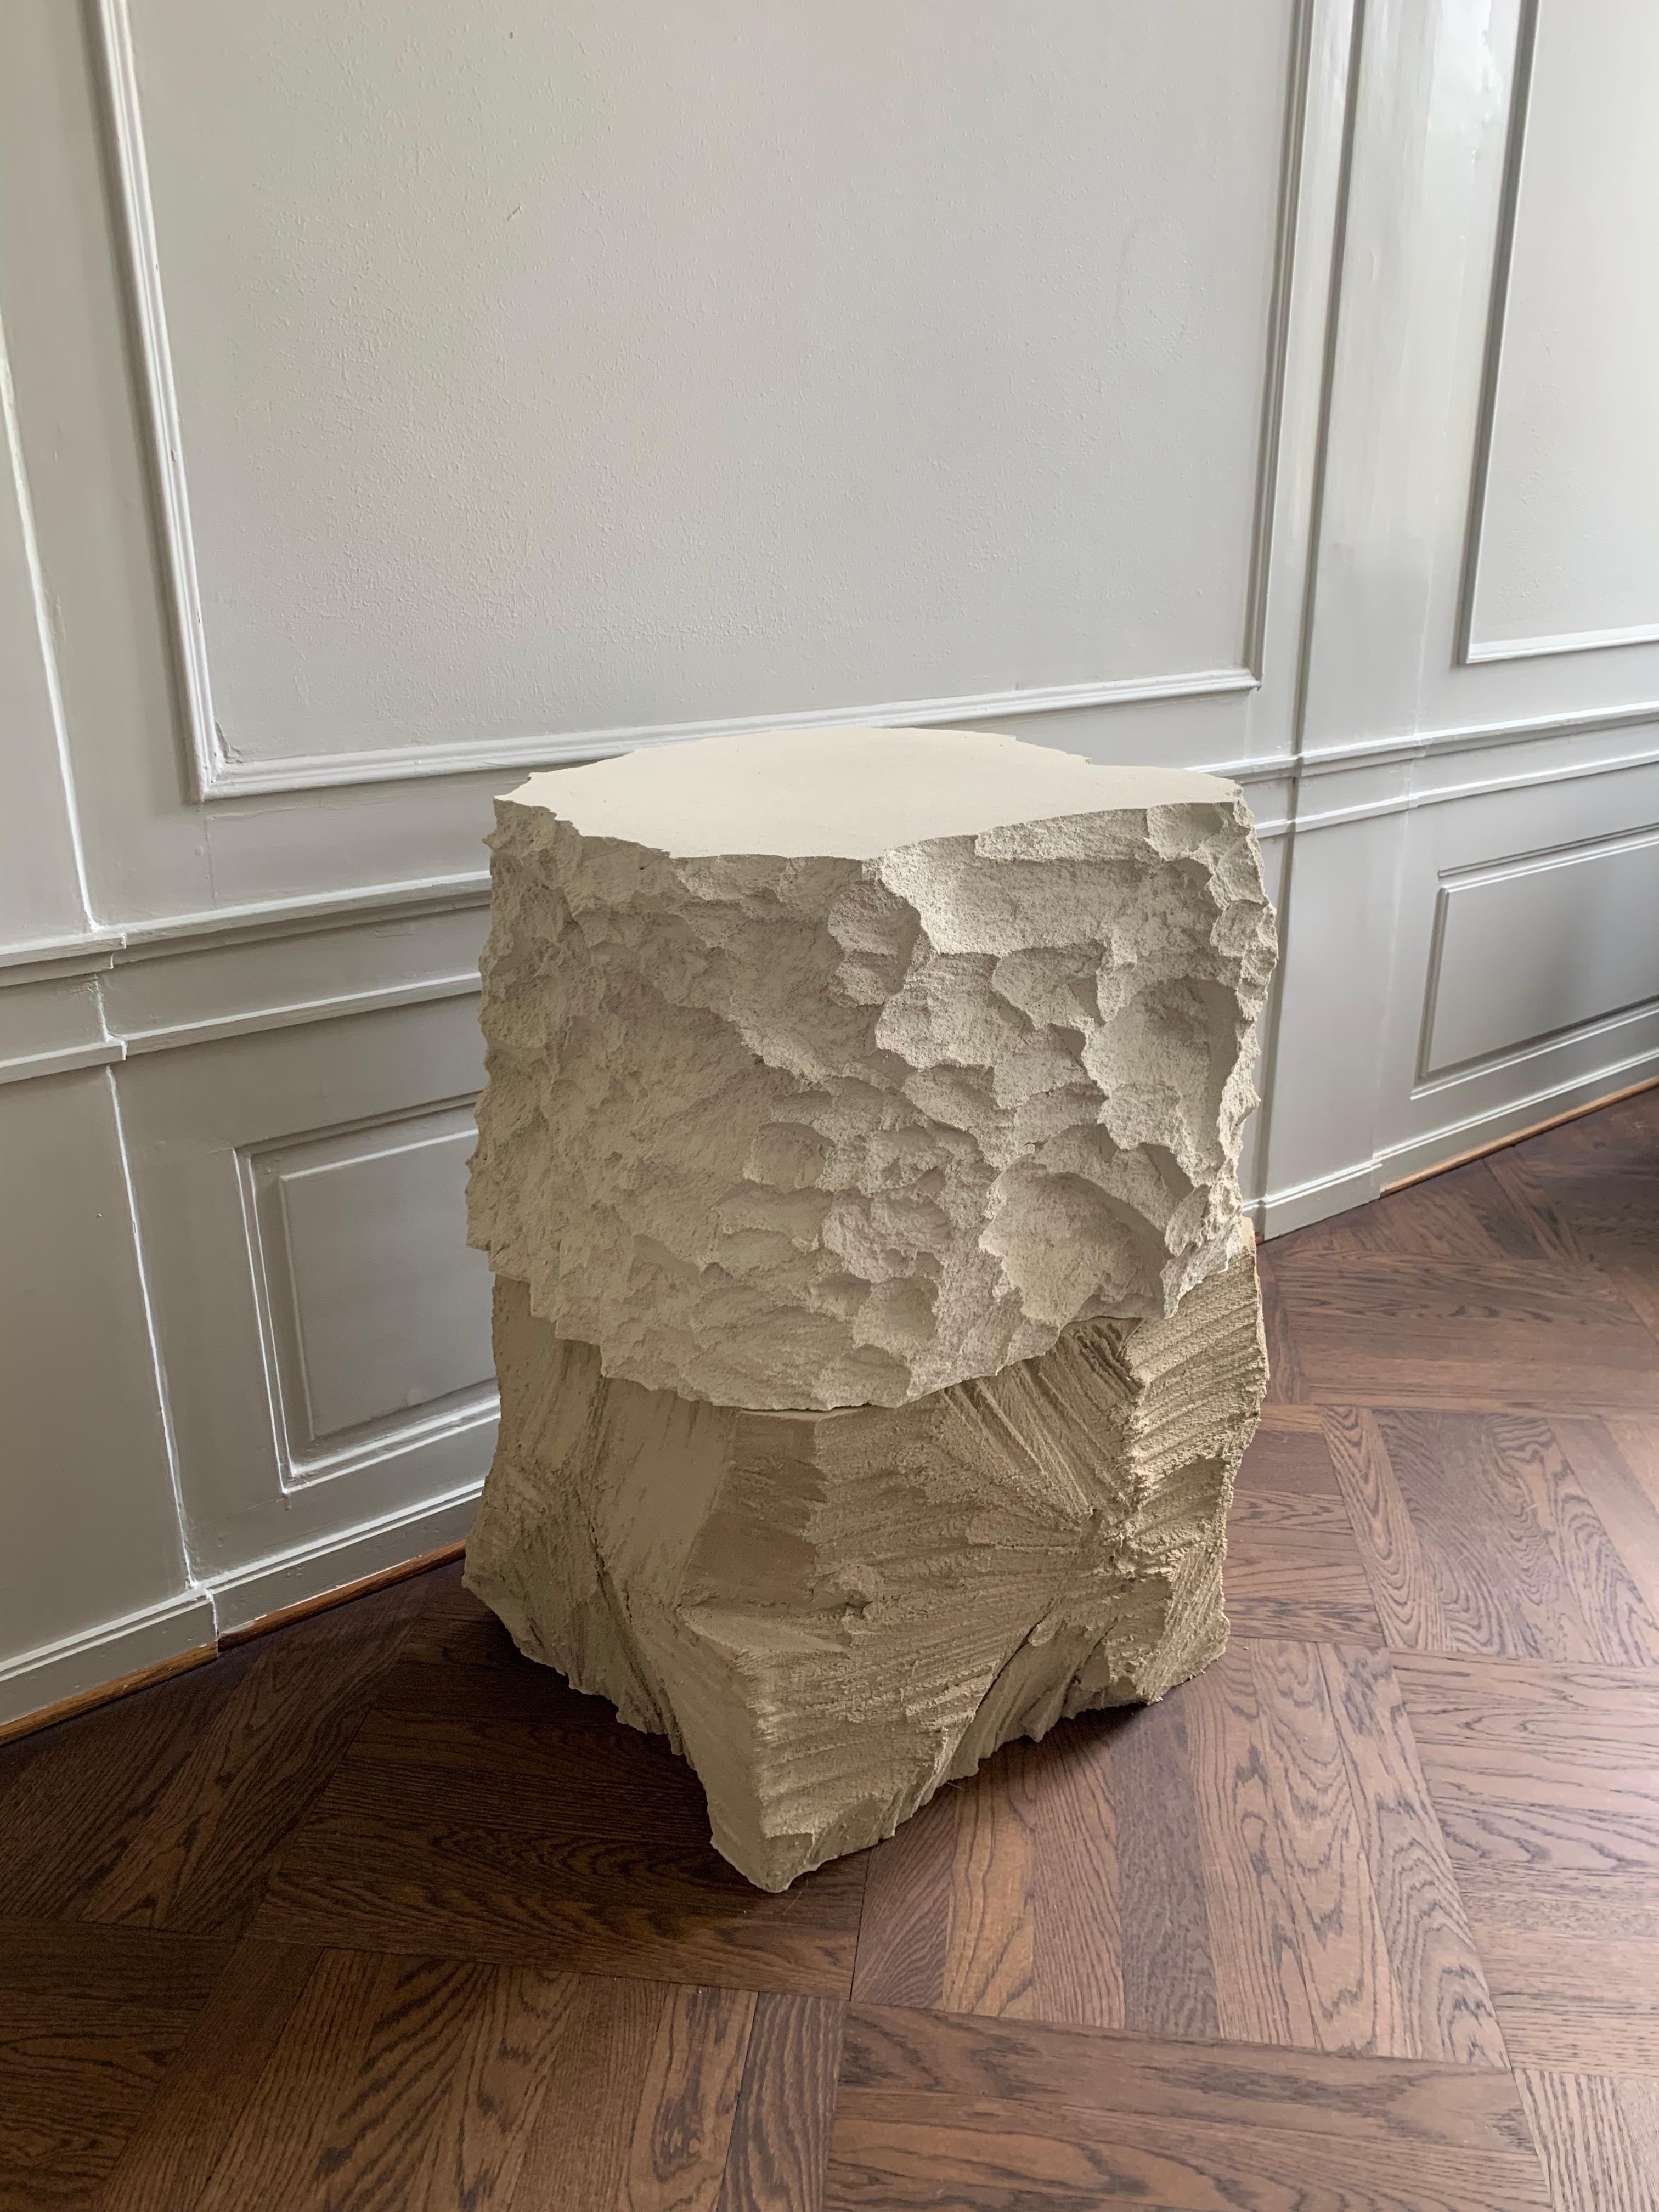 One-off a kind - Contemporary Design, Meadow Block - comes in different colors, and size and you can choose round og square shapes. embody the surface of stone and rocks.
Made by the art and design duo Andredottir & Bobek

They have in this